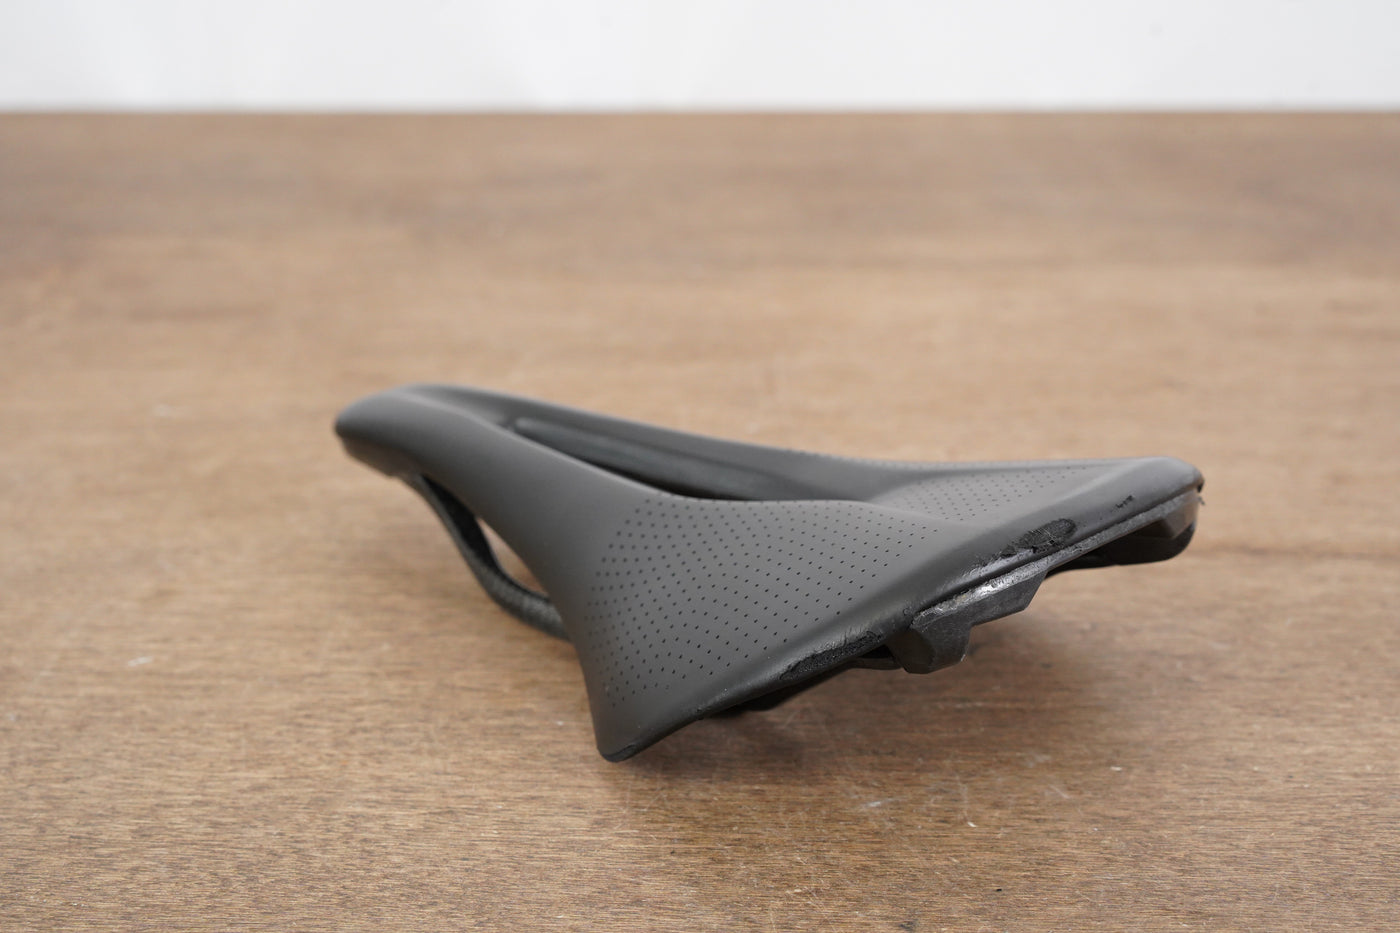 143mm Specialized S-WORKS Power Carbon Road Saddle